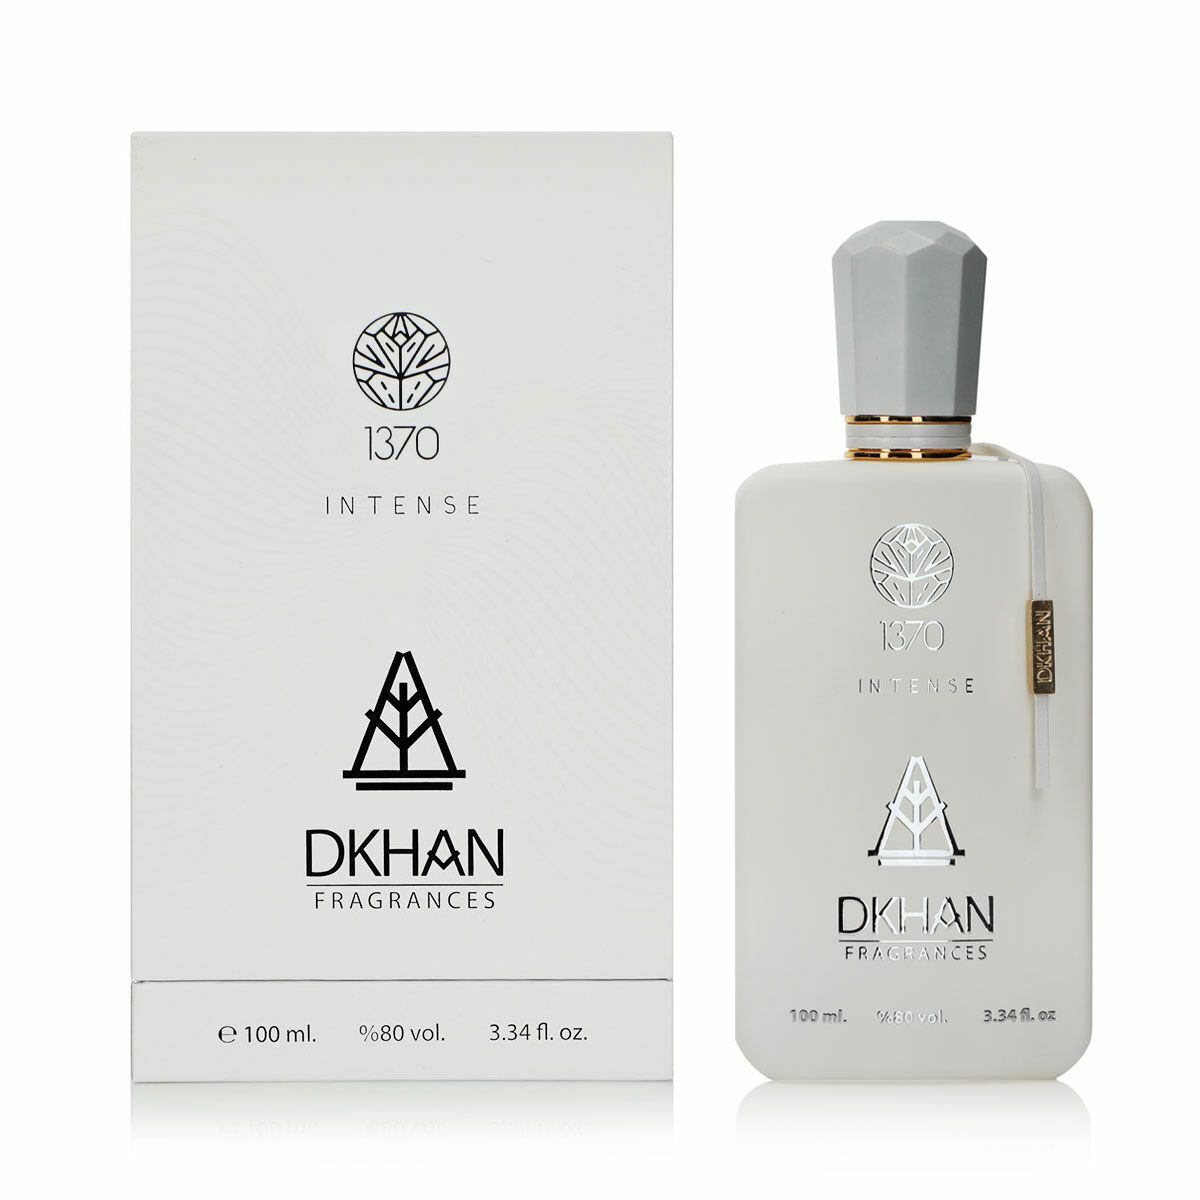 The image showcases a frosted glass perfume bottle with a matte finish and a silver cap, standing next to its packaging. The bottle and the box both prominently feature the embossed branding "1370 INTENSE" and the "DKHAN FRAGRANCES" emblem. Above the branding on both items, a leaf-like logo is present. On the bottle's right side, there is a slender vertical label with additional details. The box mimics the bottle's color and has a subtle texture with curved lines radiating from the center.